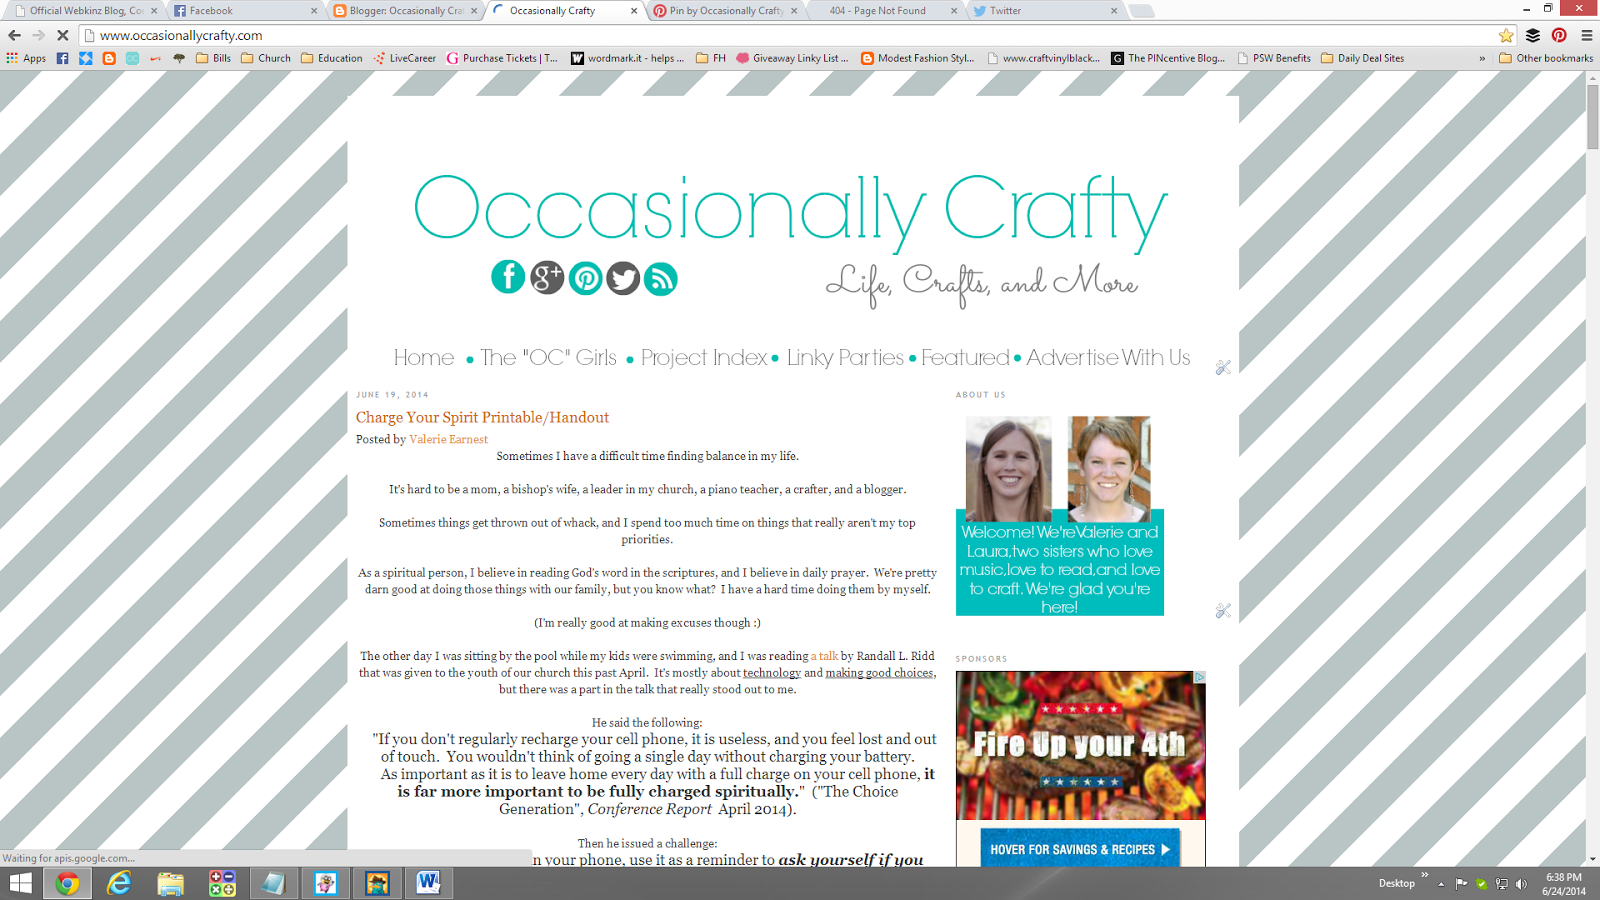 Make Your Blog Beautiful: Taking the Fear out of DIY Blog Design   Occasionally Crafty: Make Your Blog Beautiful: Taking the Fear out of DIY  Blog Design